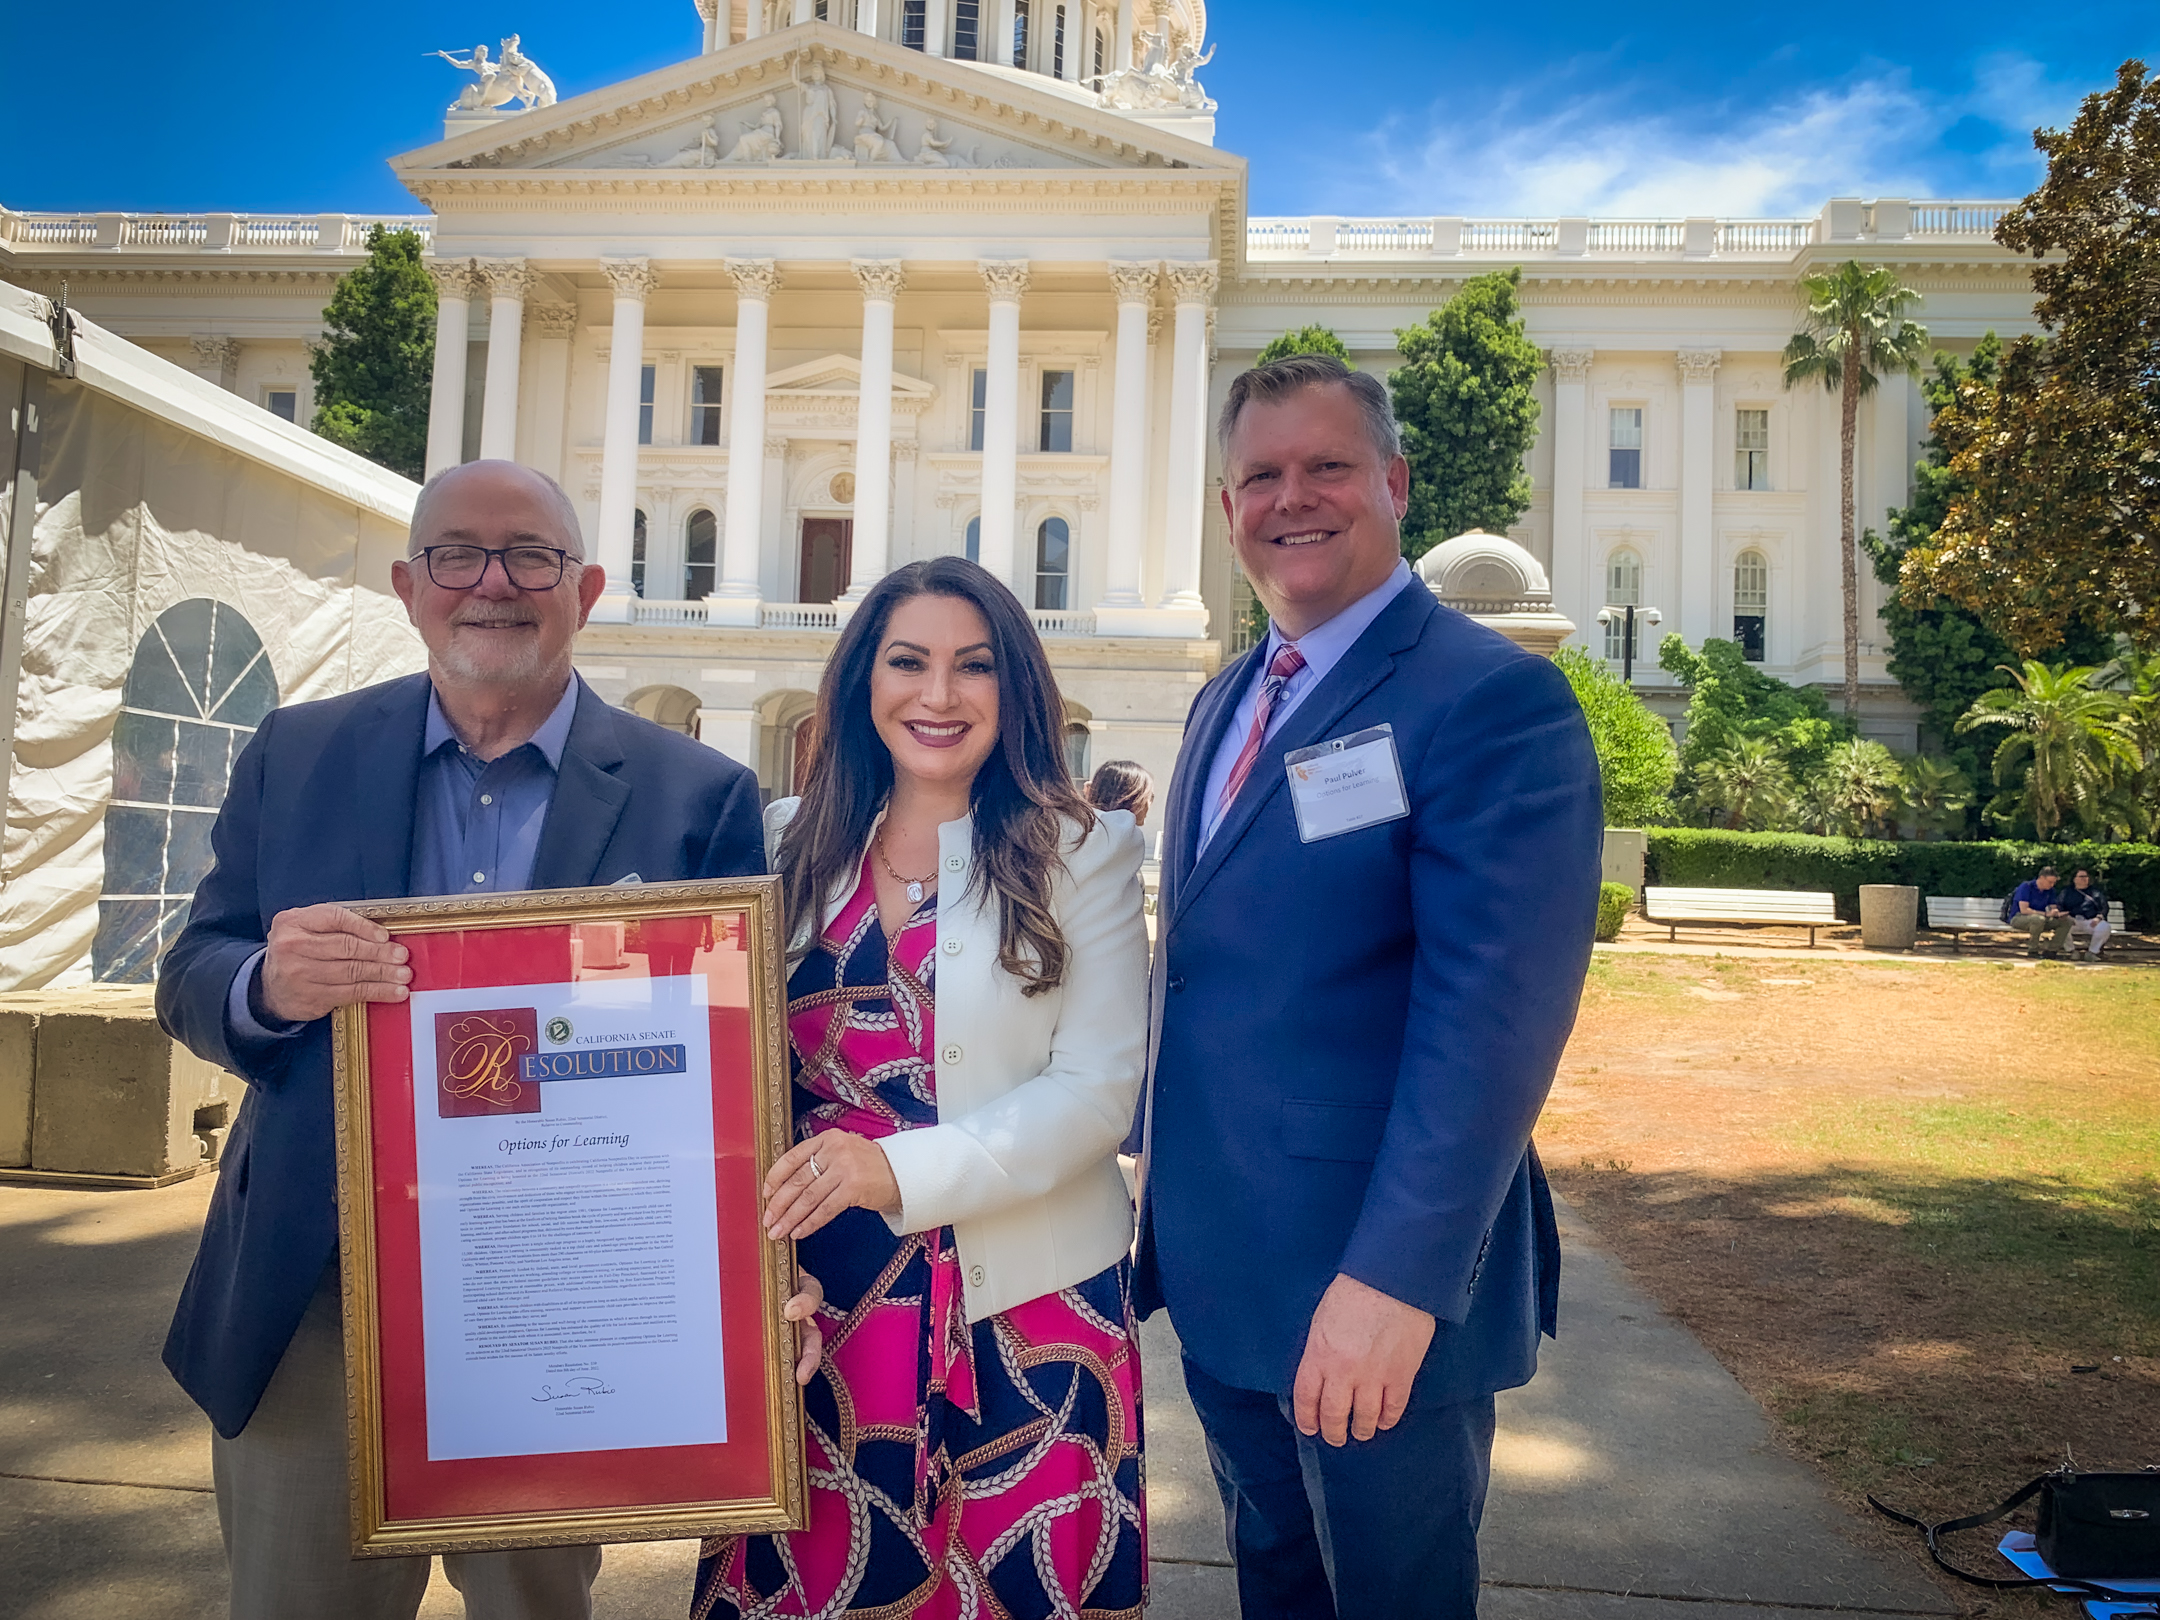 Options for Learning’s board chair, David Wilbur (left), and CEO Paul Pulver (right) accept the state resolution naming the agency a Nonprofit of the Year from Sen. Susan Rubio (center).